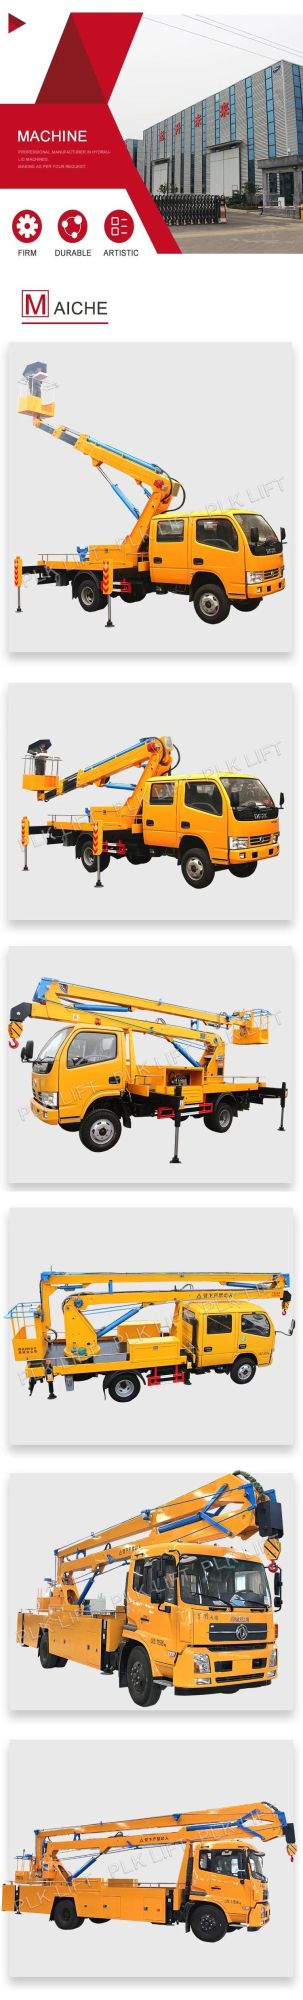 Hydraulic Lifting Machine Lift for Construction